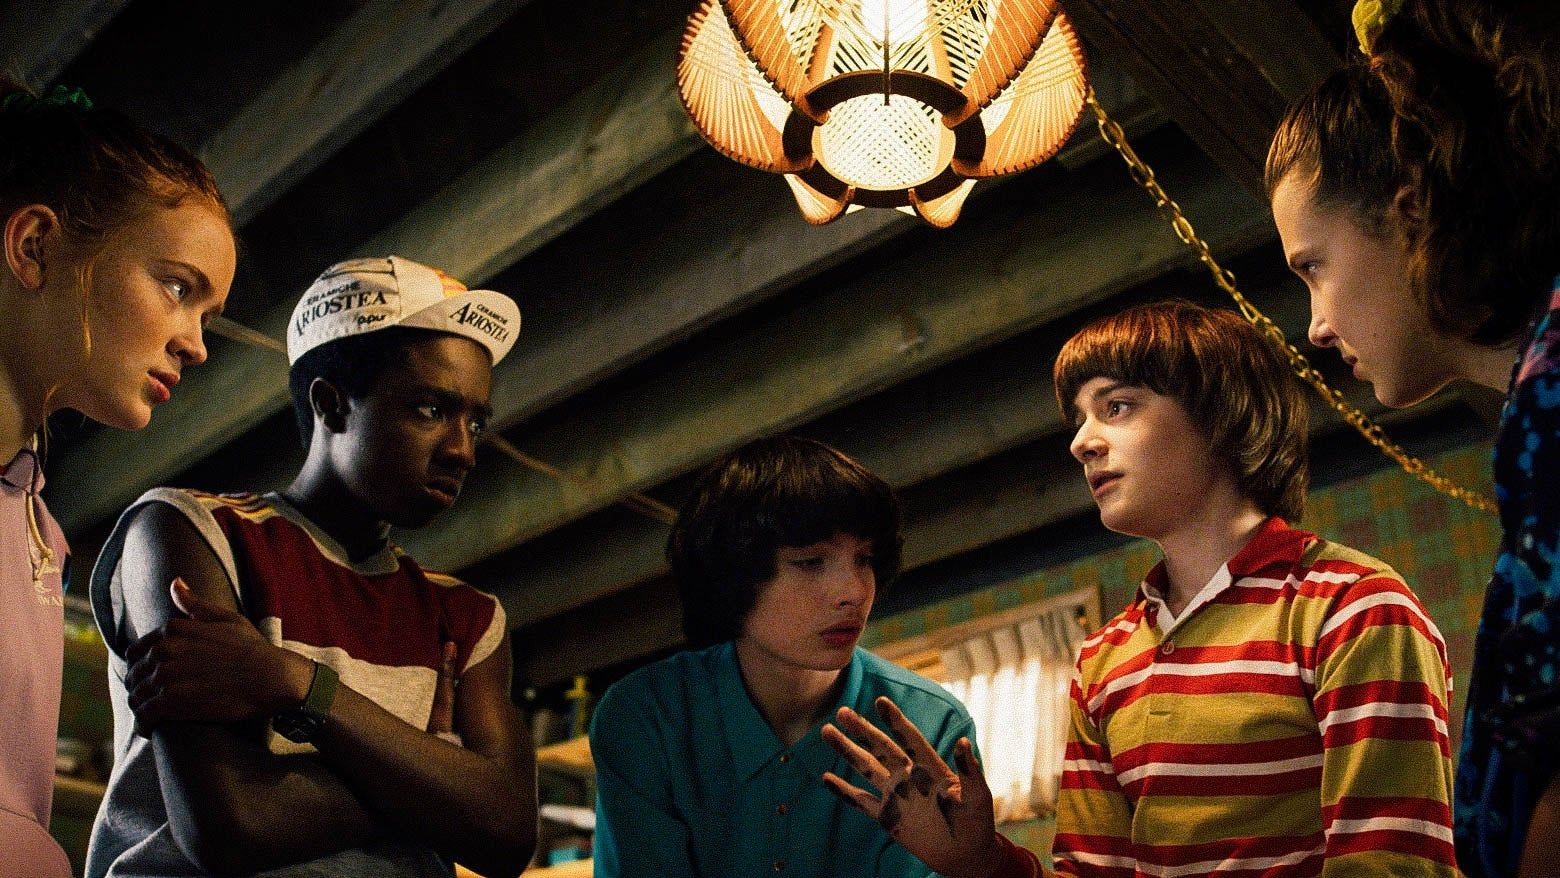 Will the kids from 'Stranger Things' actually model for Louis